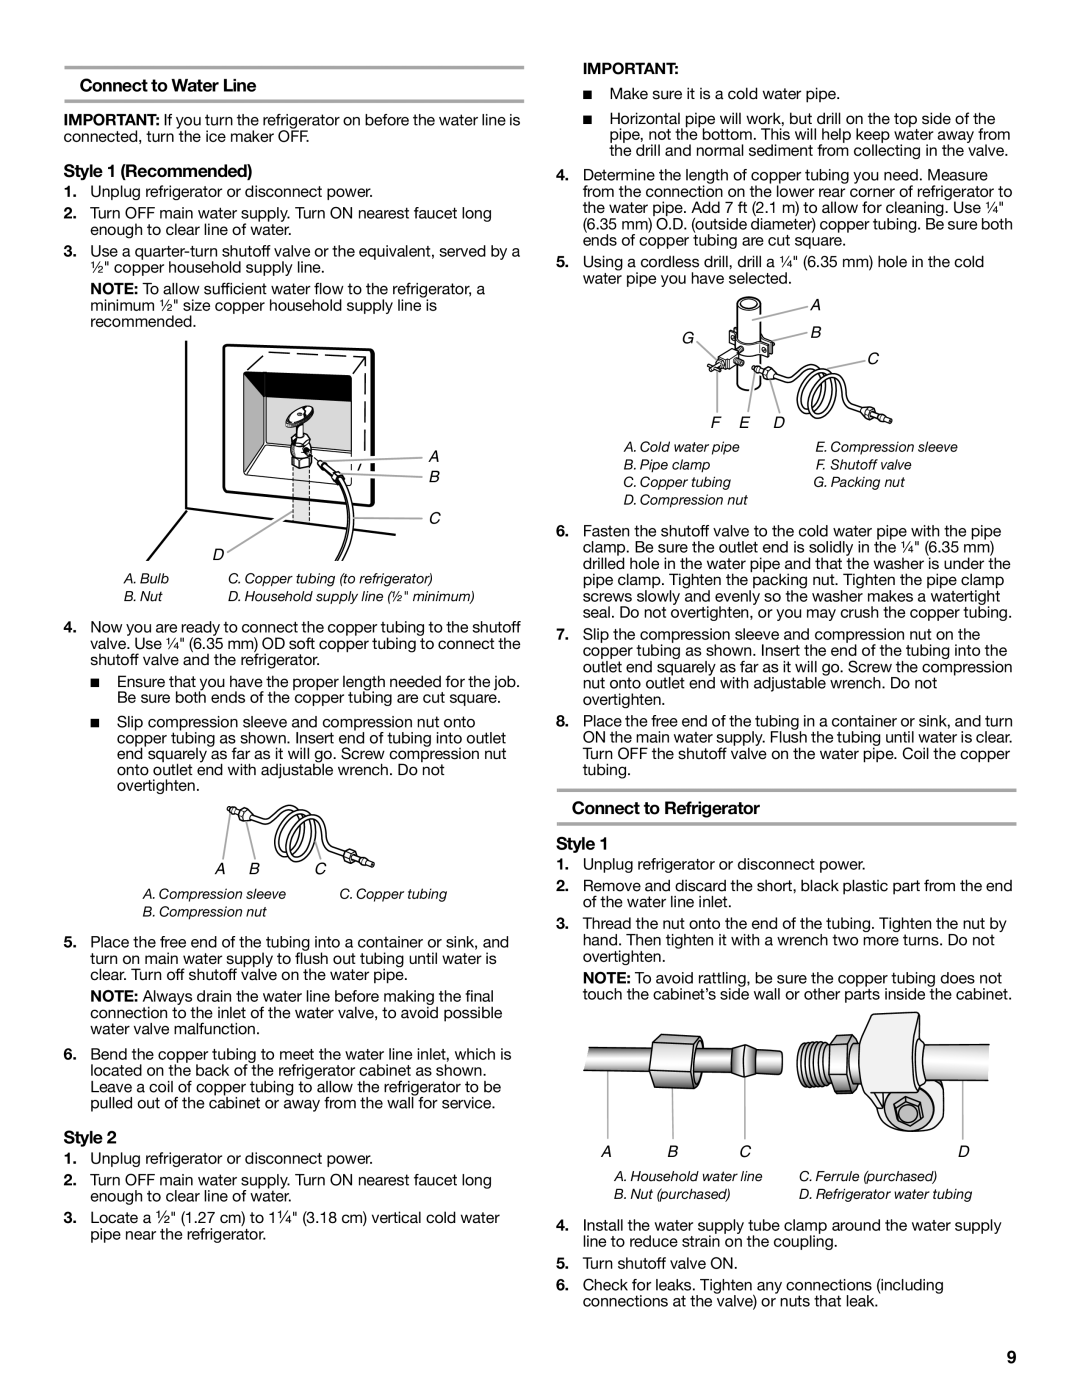 Whirlpool W10168334B installation instructions Connect to Water Line, Style 1 Recommended, Connect to Refrigerator Style 